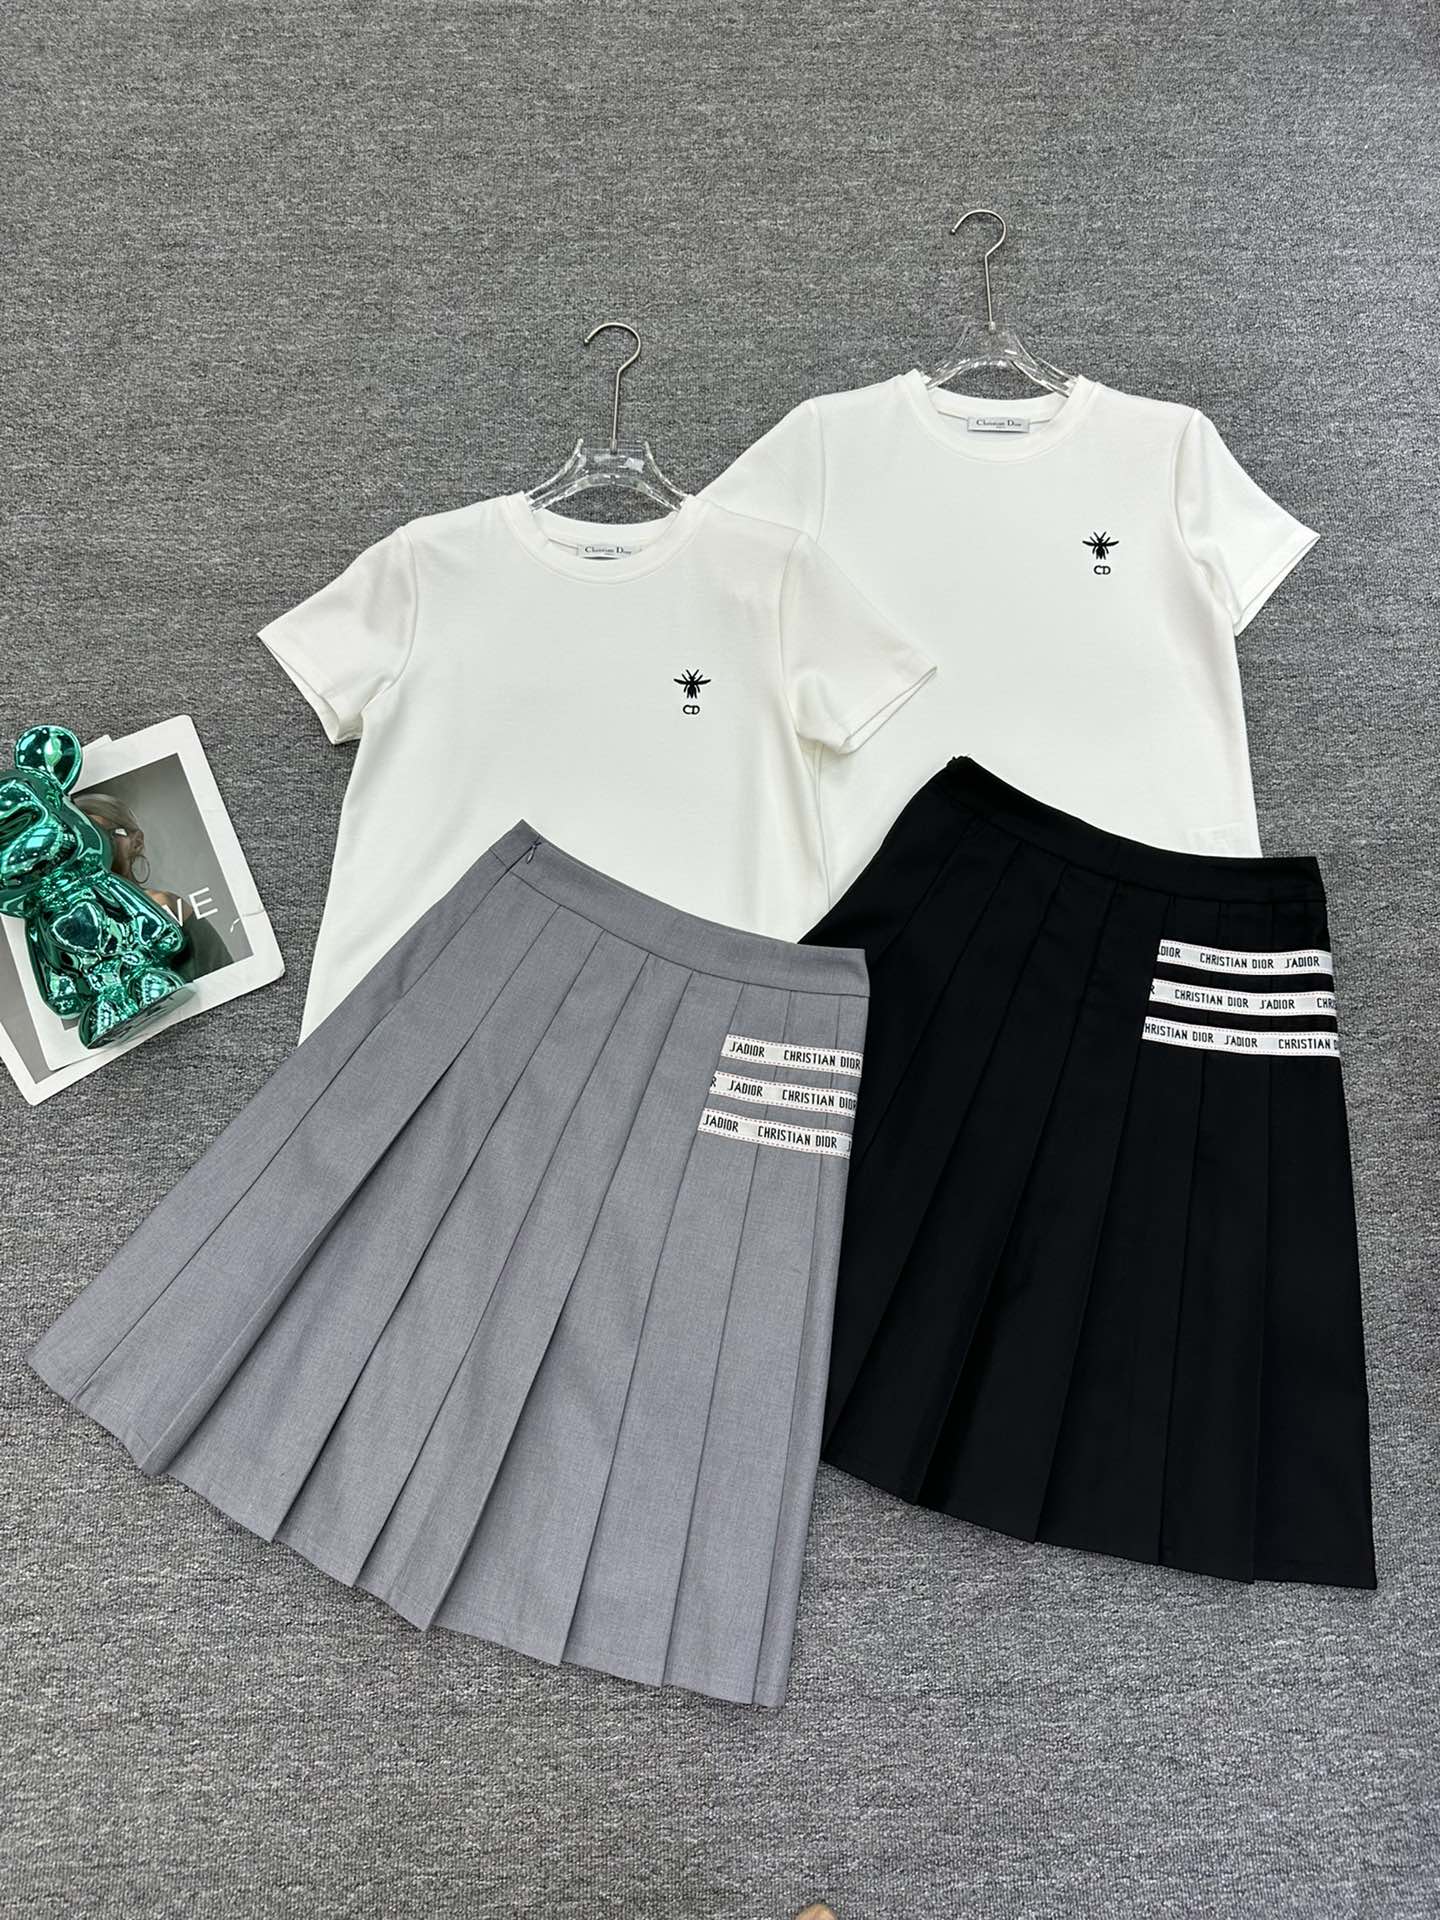 Dior Clothing Skirts T-Shirt Replica Sale online
 Spring/Summer Collection